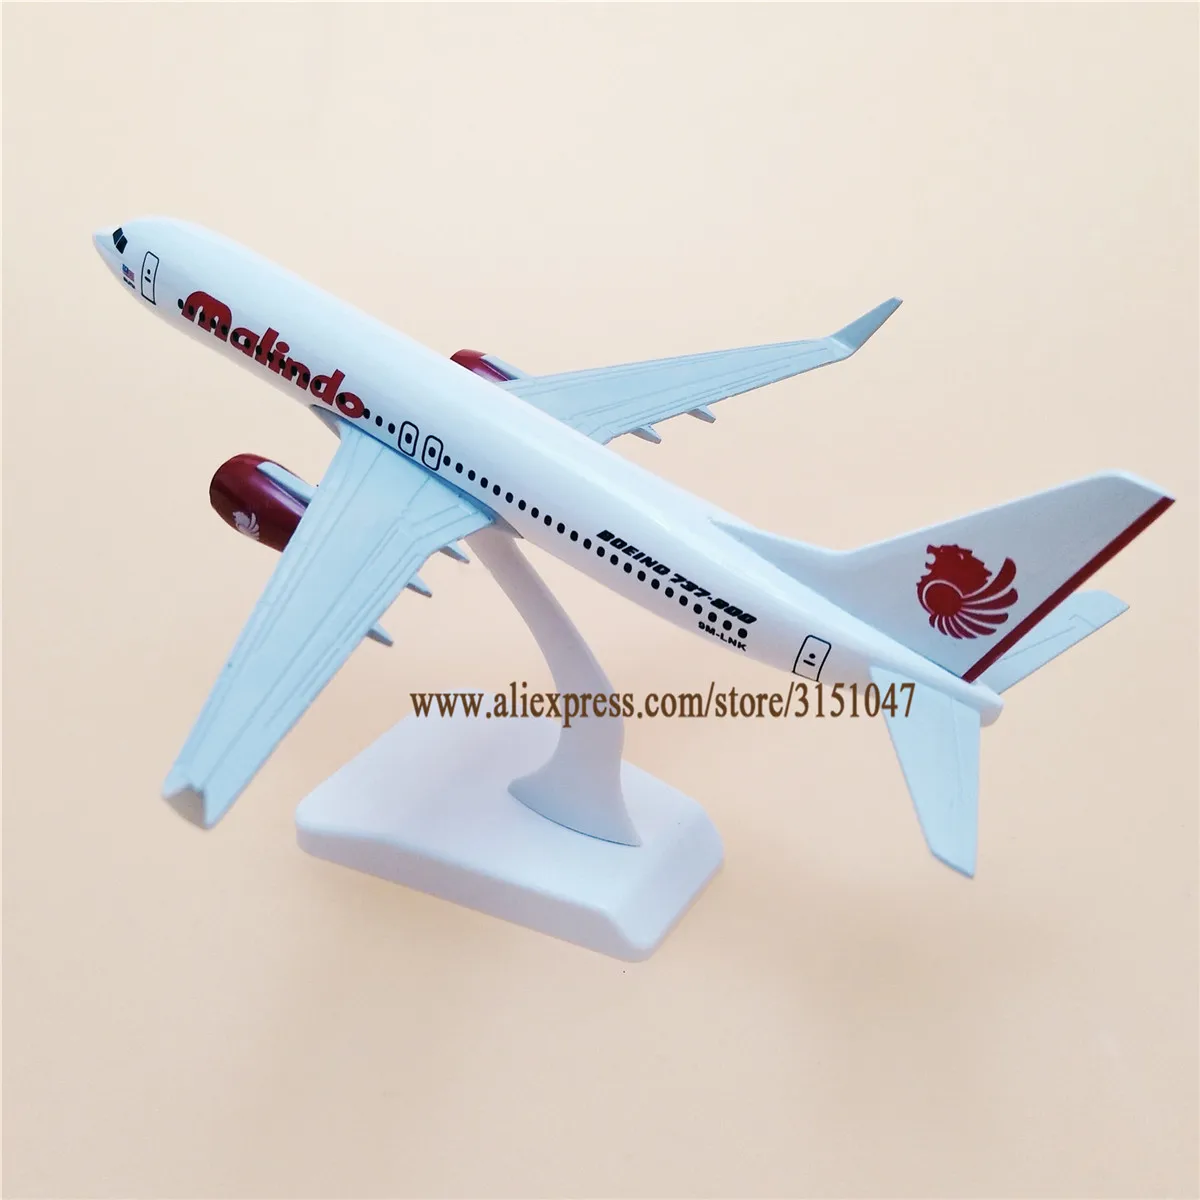 

20cm Air Malaysia Malindo Airlines B737 Boeing 737 Airways Airplane Model Plane Alloy Metal Aircraft Diecast Toy Kids Gift